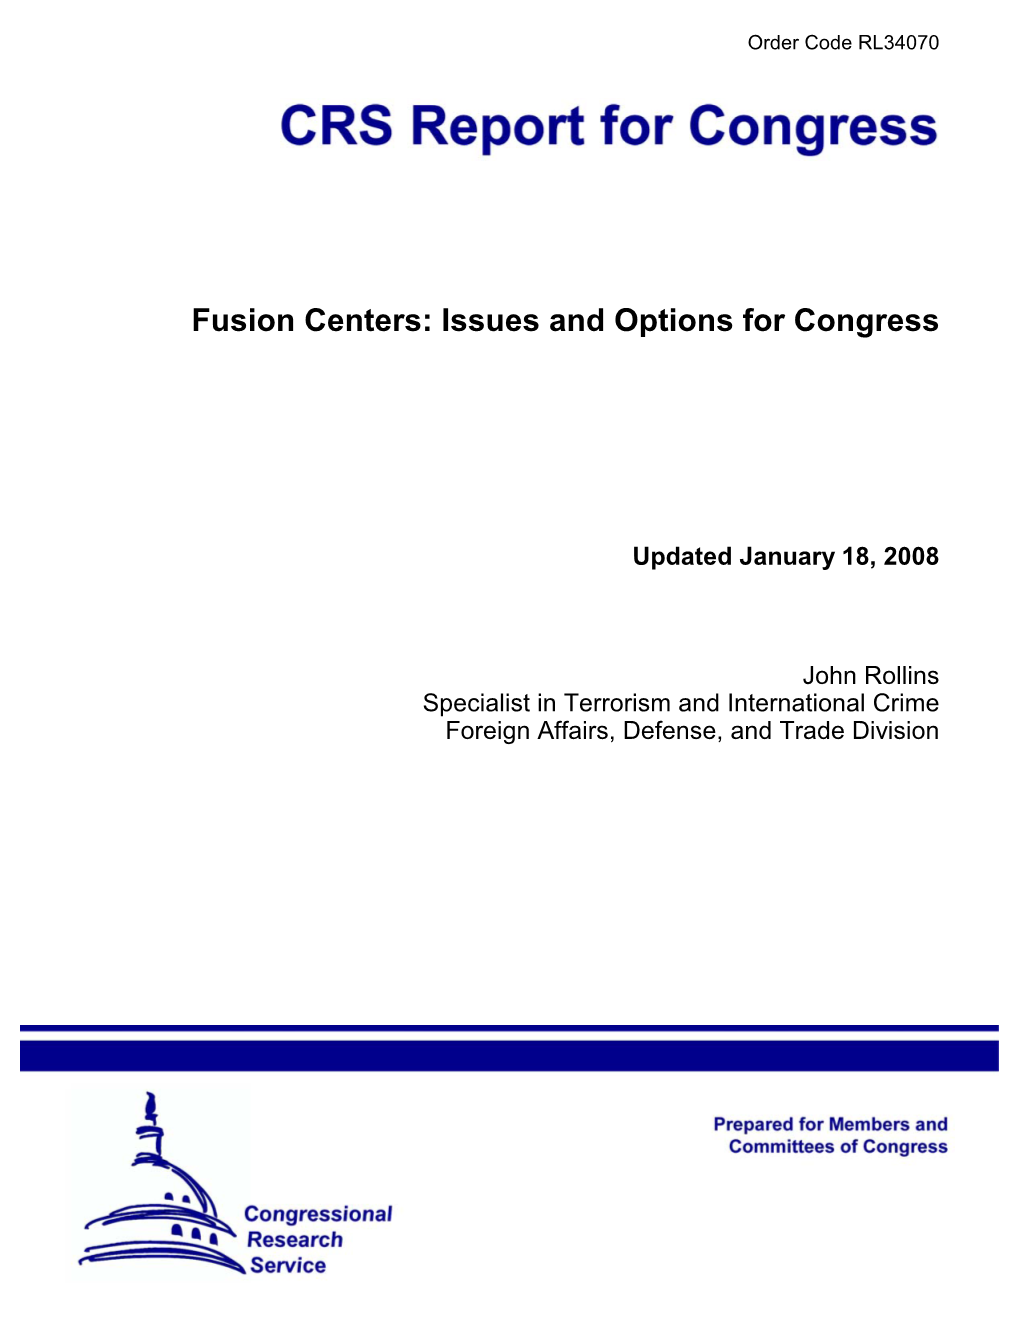 Fusion Centers: Issues and Options for Congress